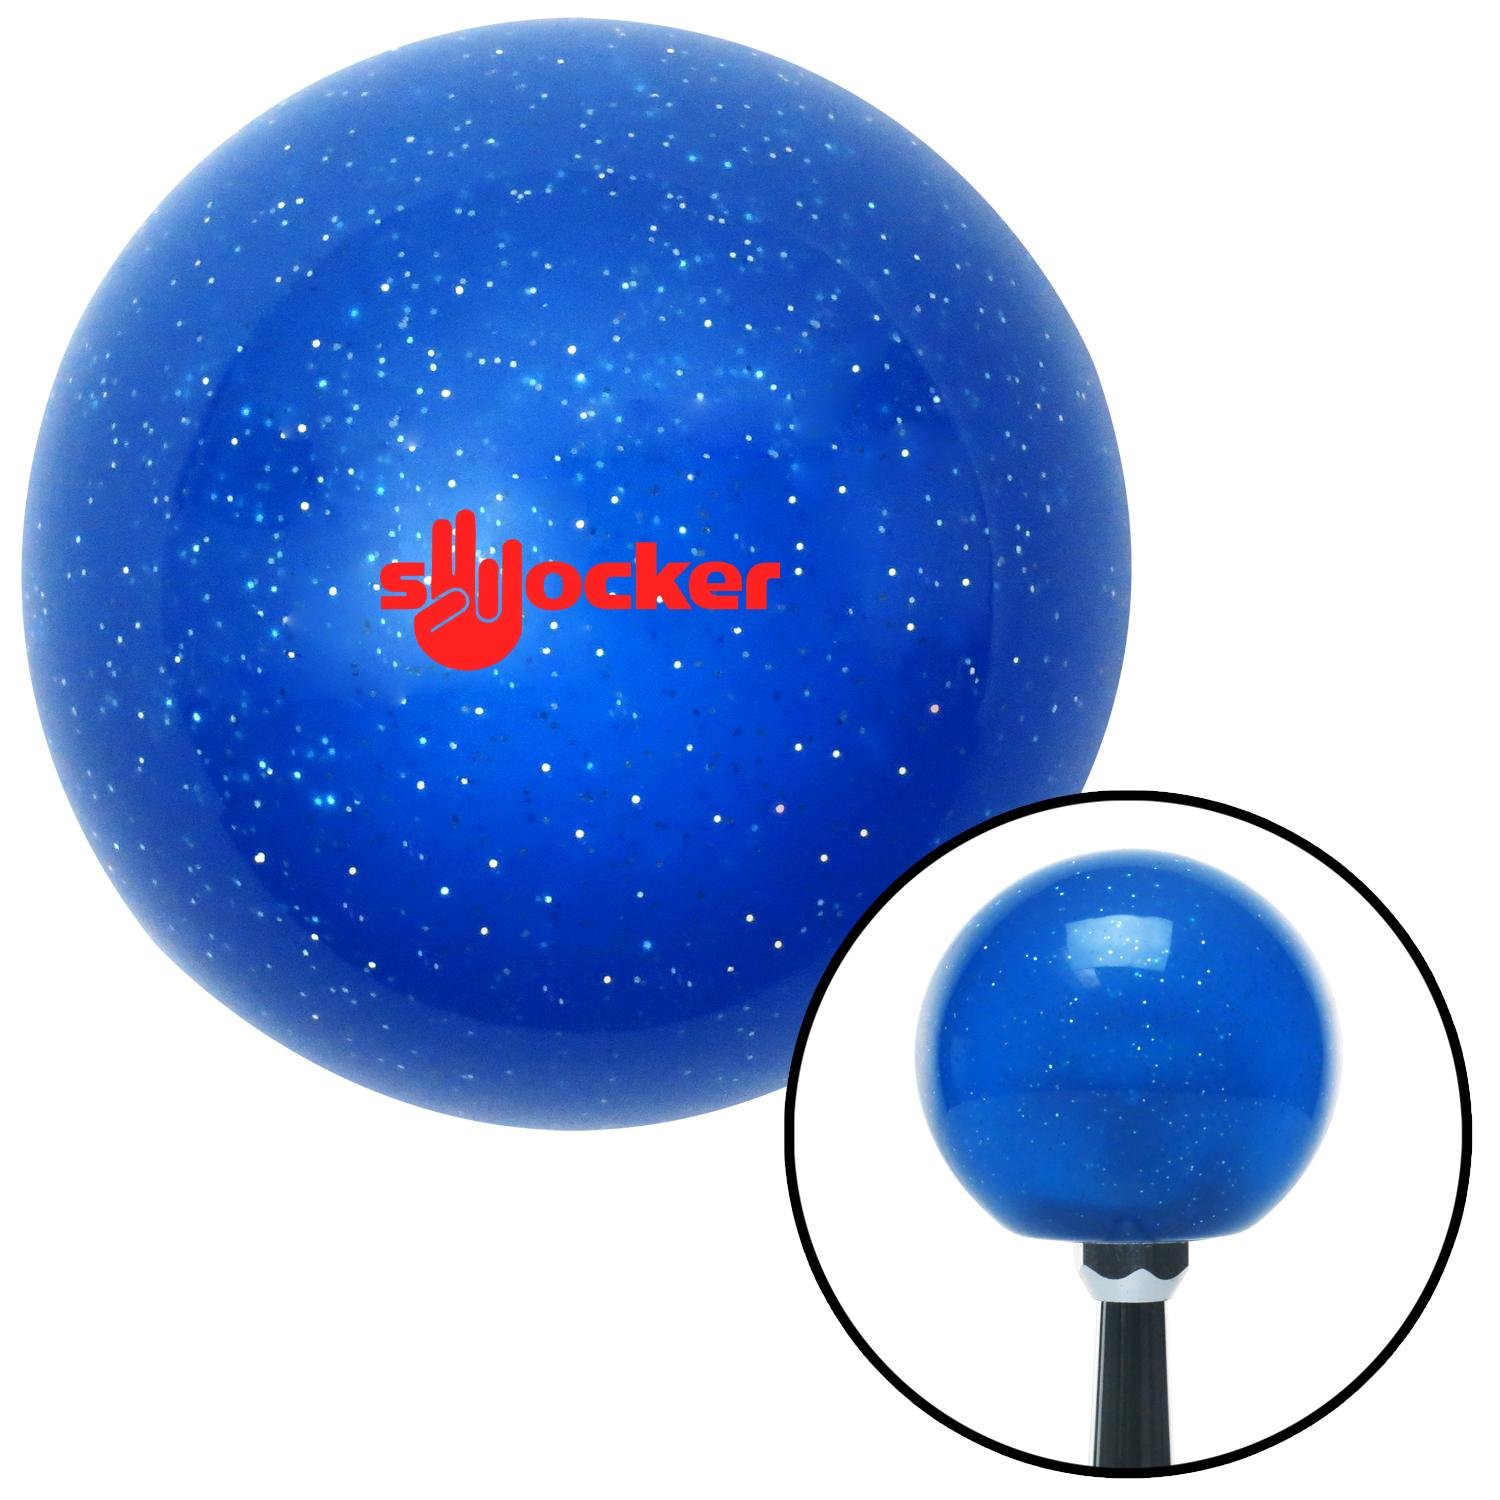 American Shifter 282342 Shift Knob Company Blue Shocker Text Red Metal Flake with M16 x 1.5 Insert 